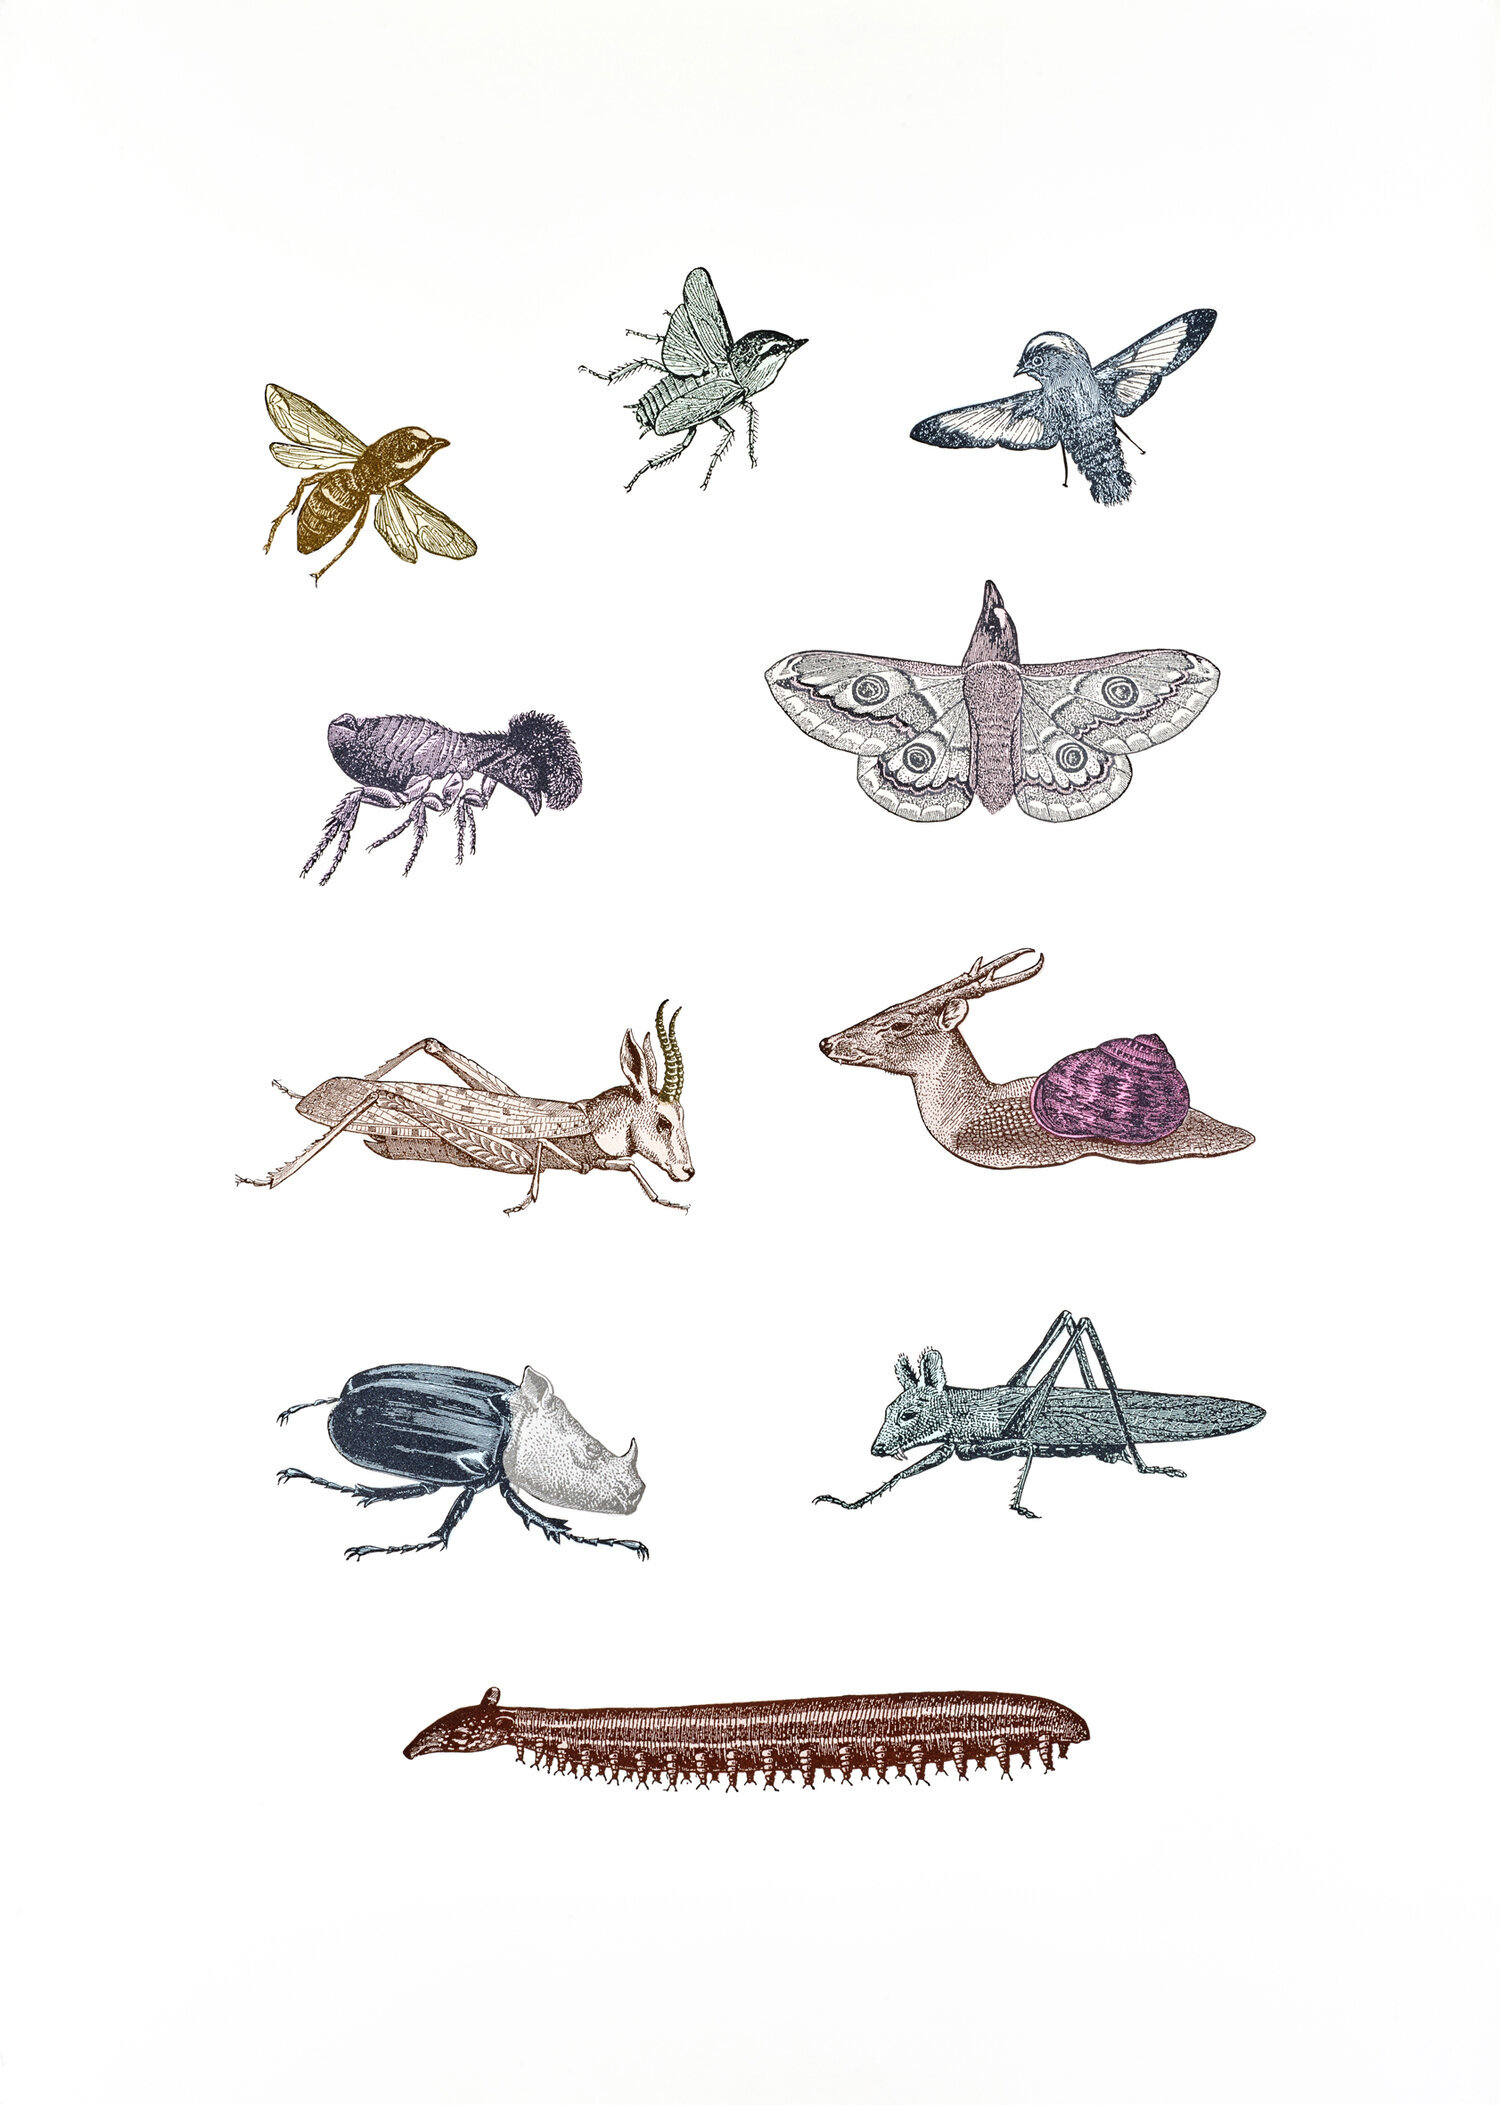 Animated Animals of the Small Kind